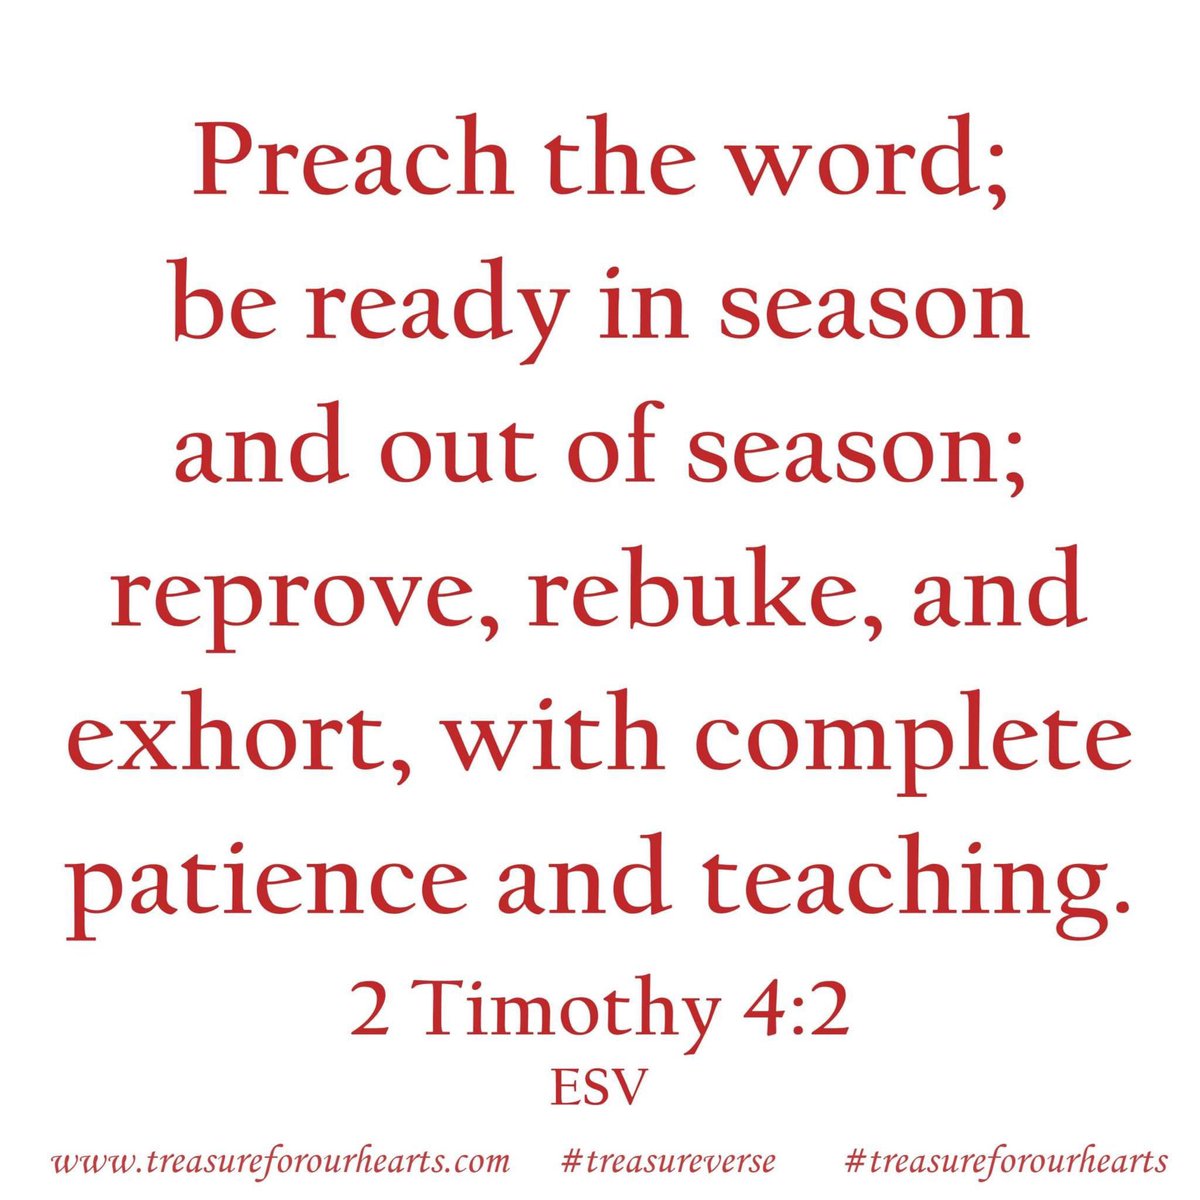 Preach . . be ready . . complete patience . . 
Preach the word; be ready in season and out of season; reprove, rebuke, and exhort, with complete patience and teaching. 2 Timothy 4:2 (ESV) #treasureverse #2Timothy42 #GodsWord #bibleverse #preachtheword Lin